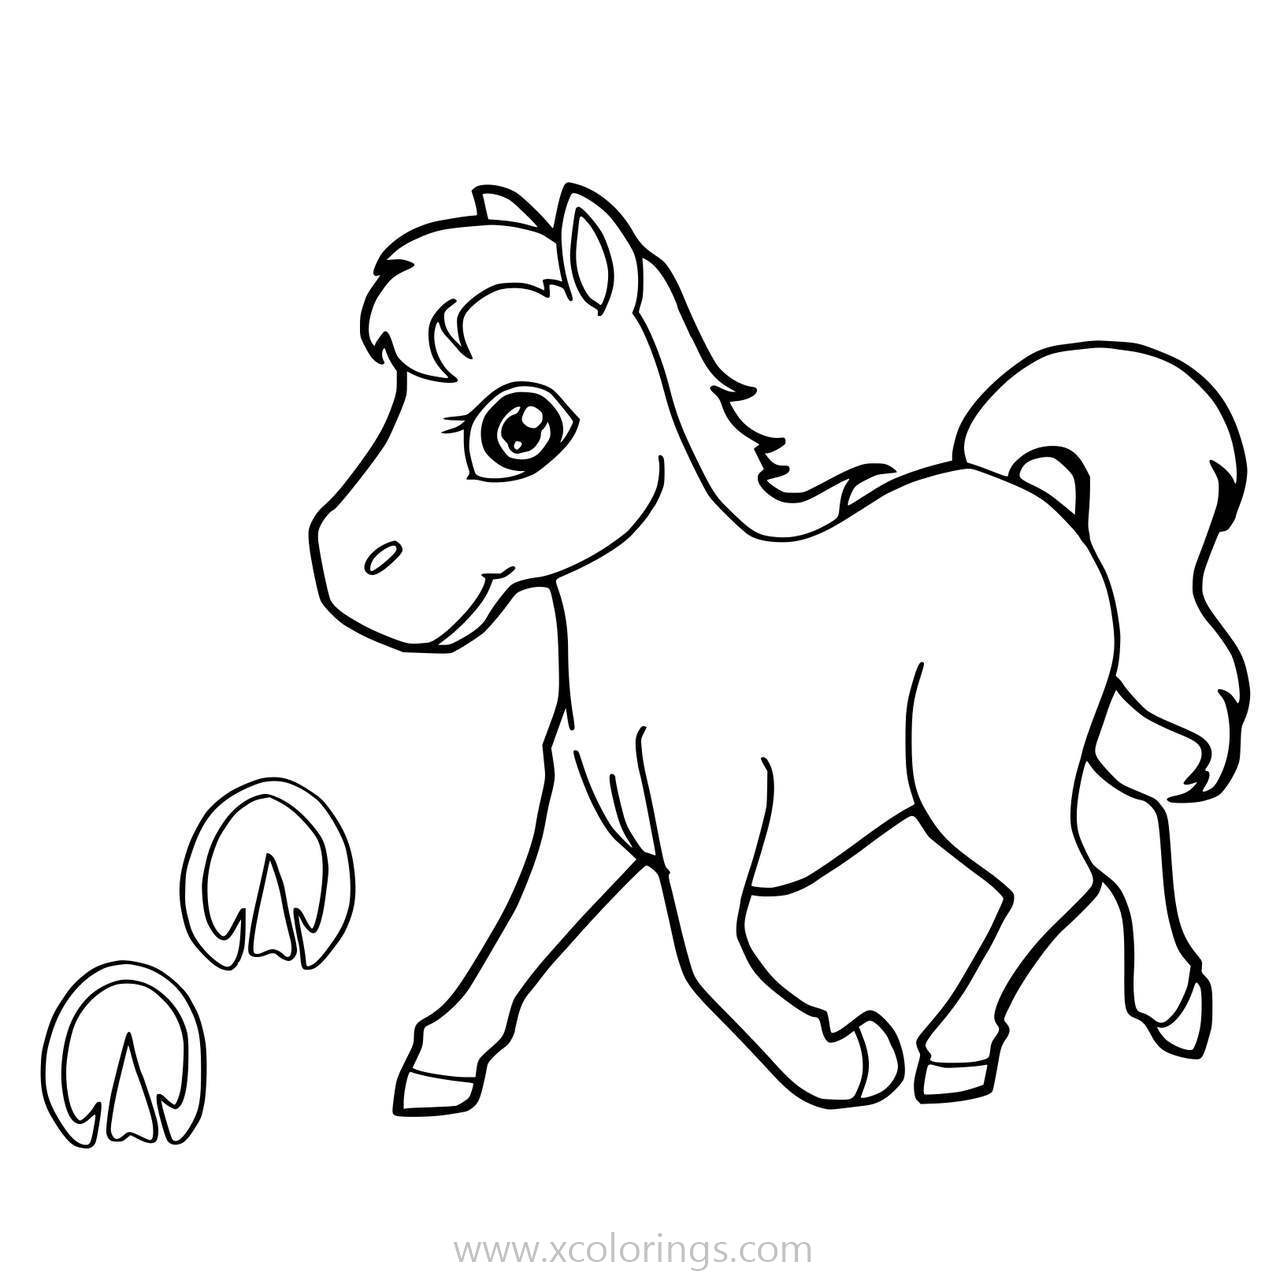 Free Cute Baby Horse Coloring Pages printable